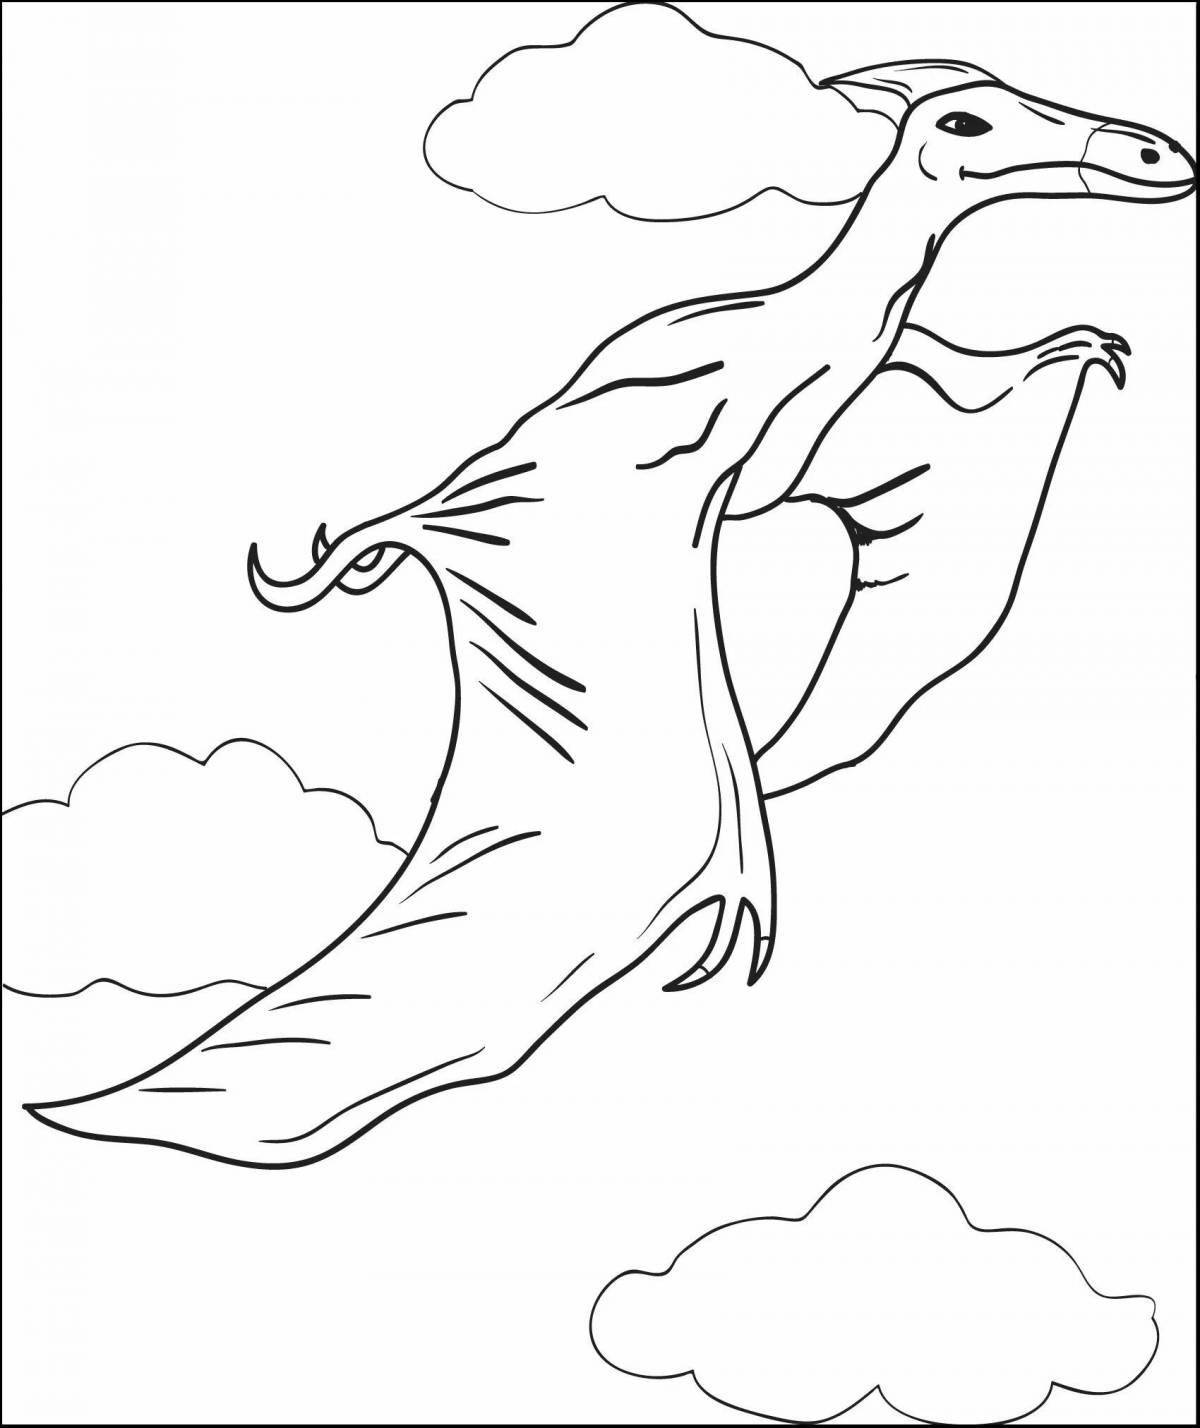 Pterodactyl coloring book for kids